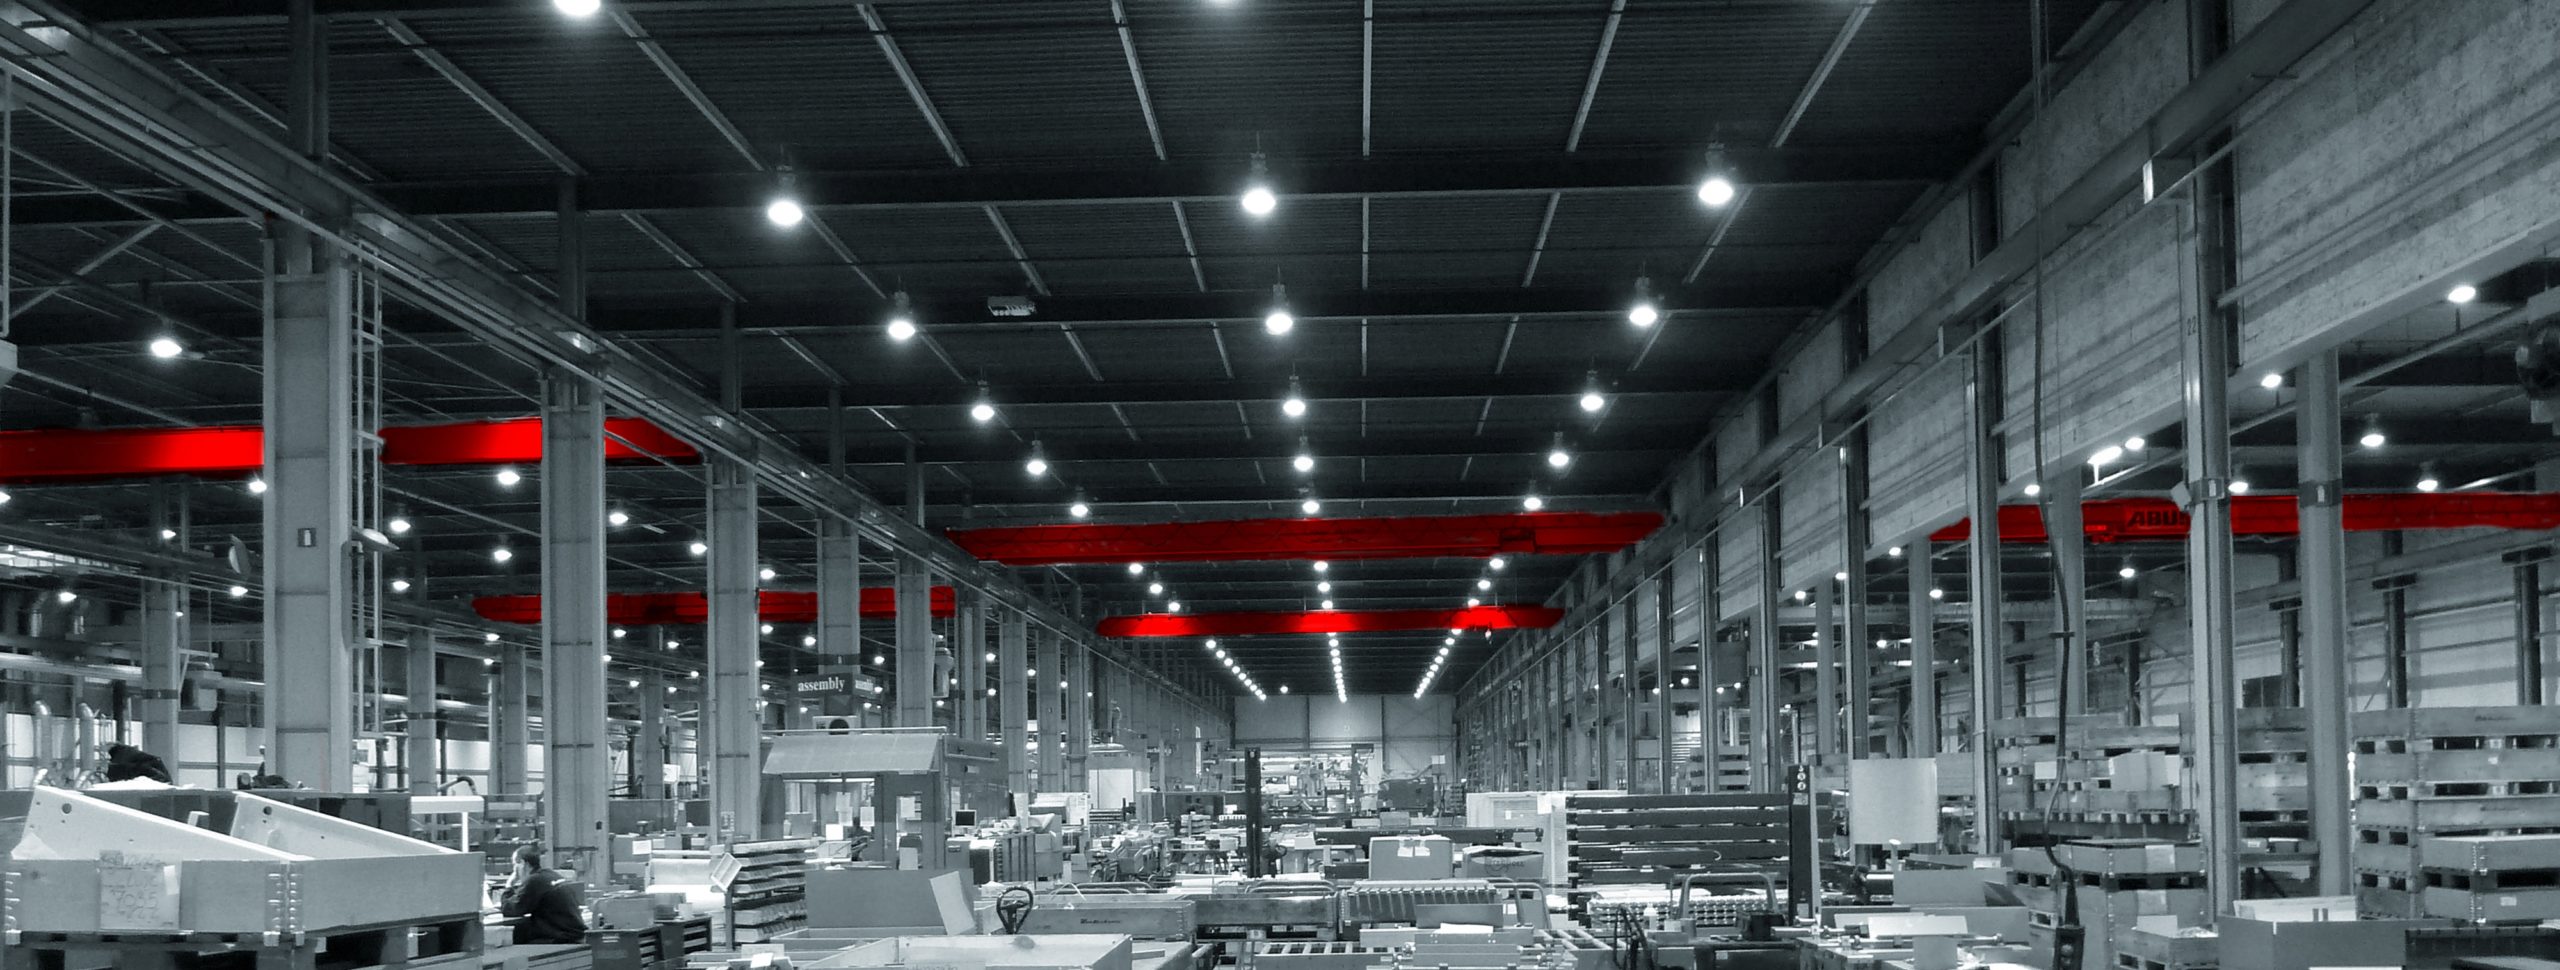 your assignment factory lighting problem